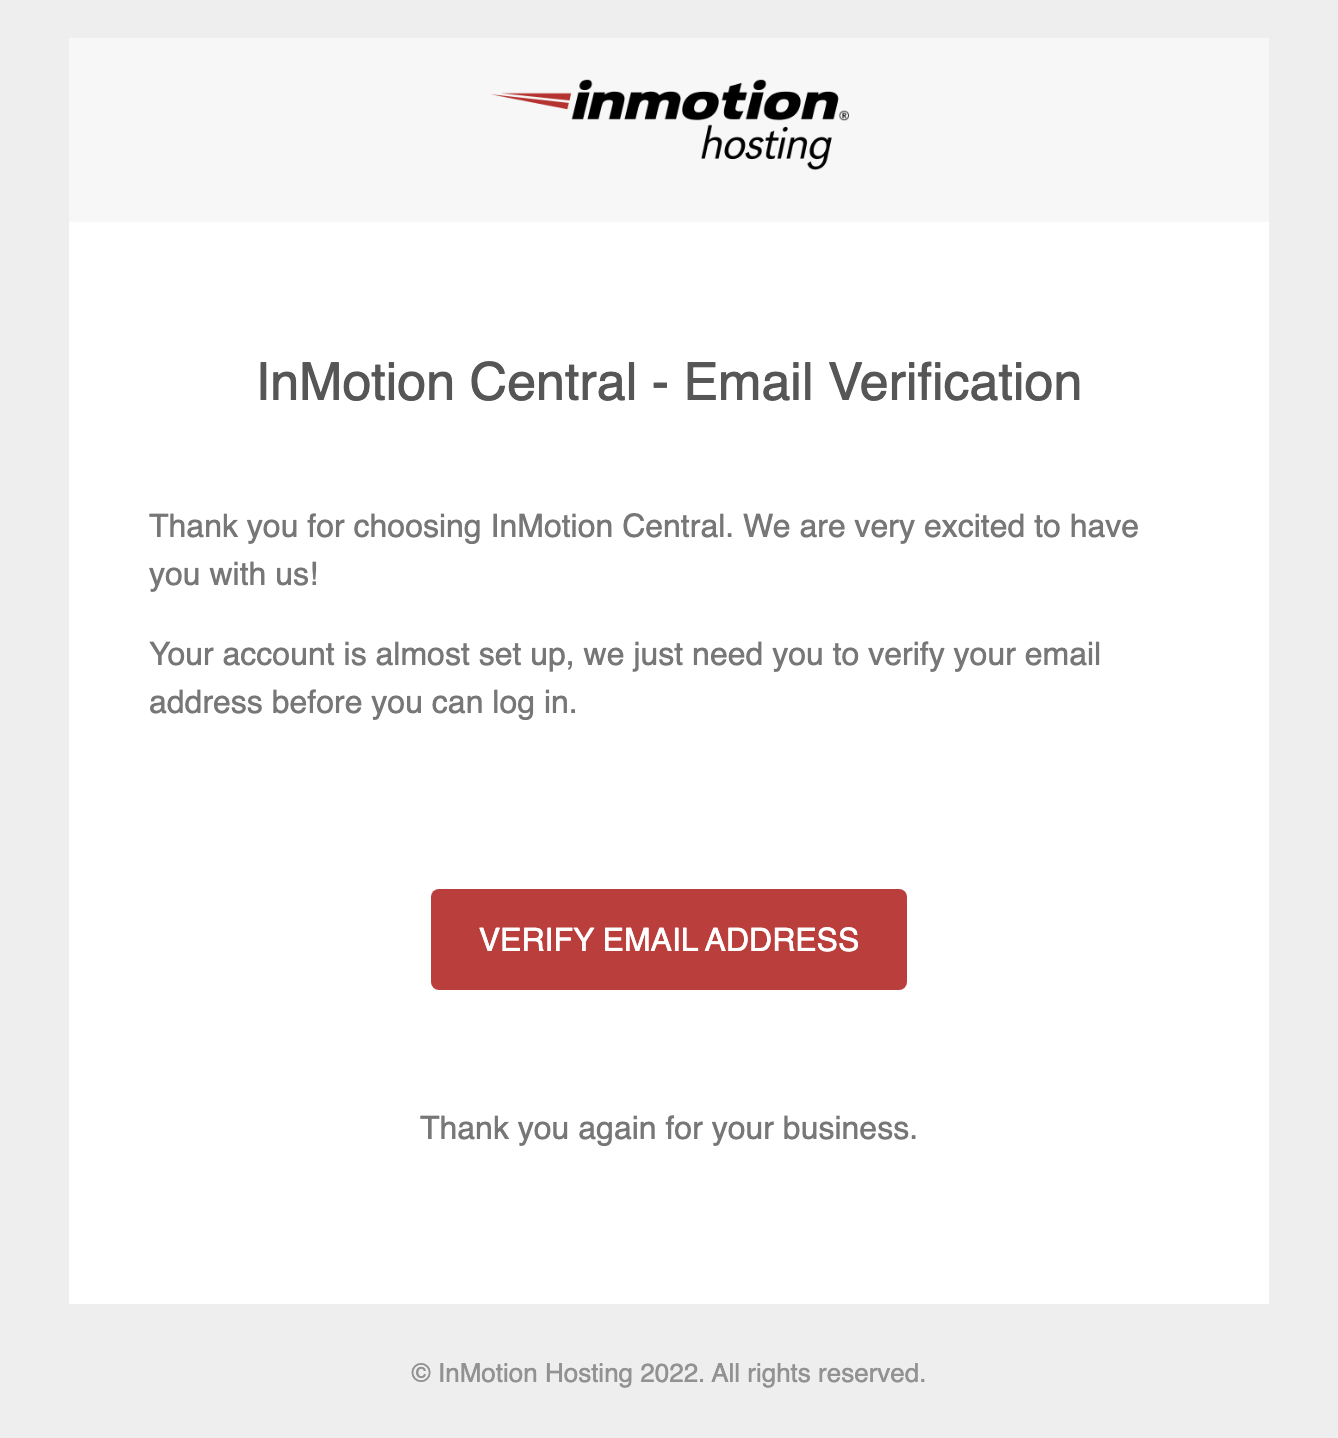 InMotion Central - Email Verification